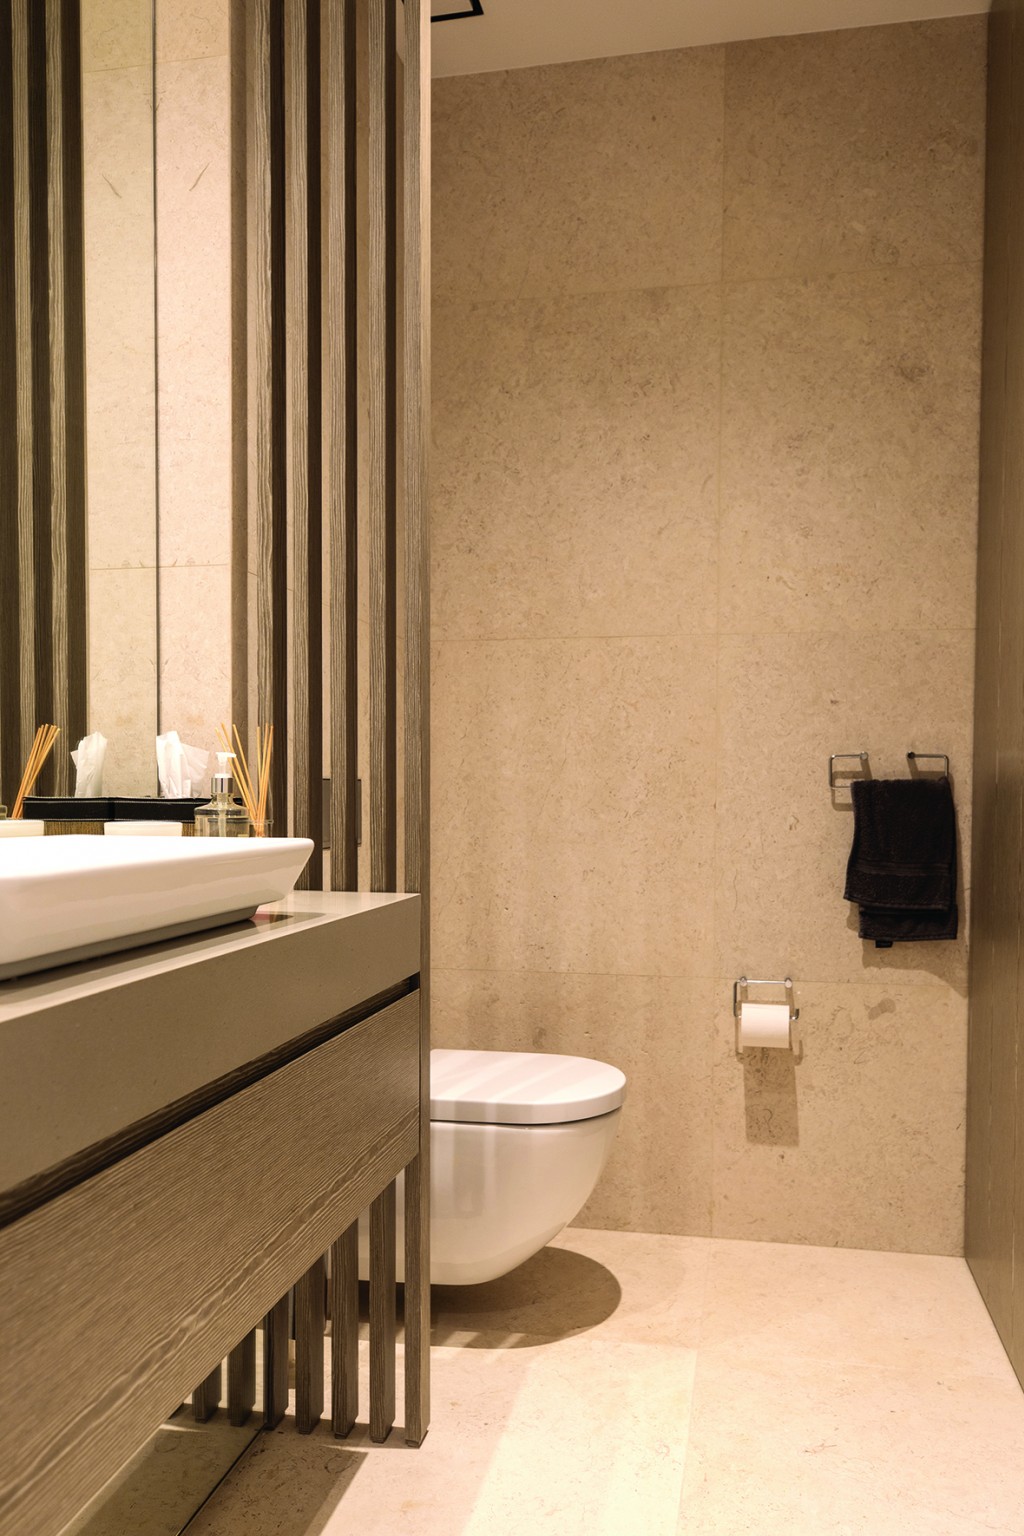 Home Renovation Ideas to Maximise your Home’s Liveability - Part 2: The Bathroom